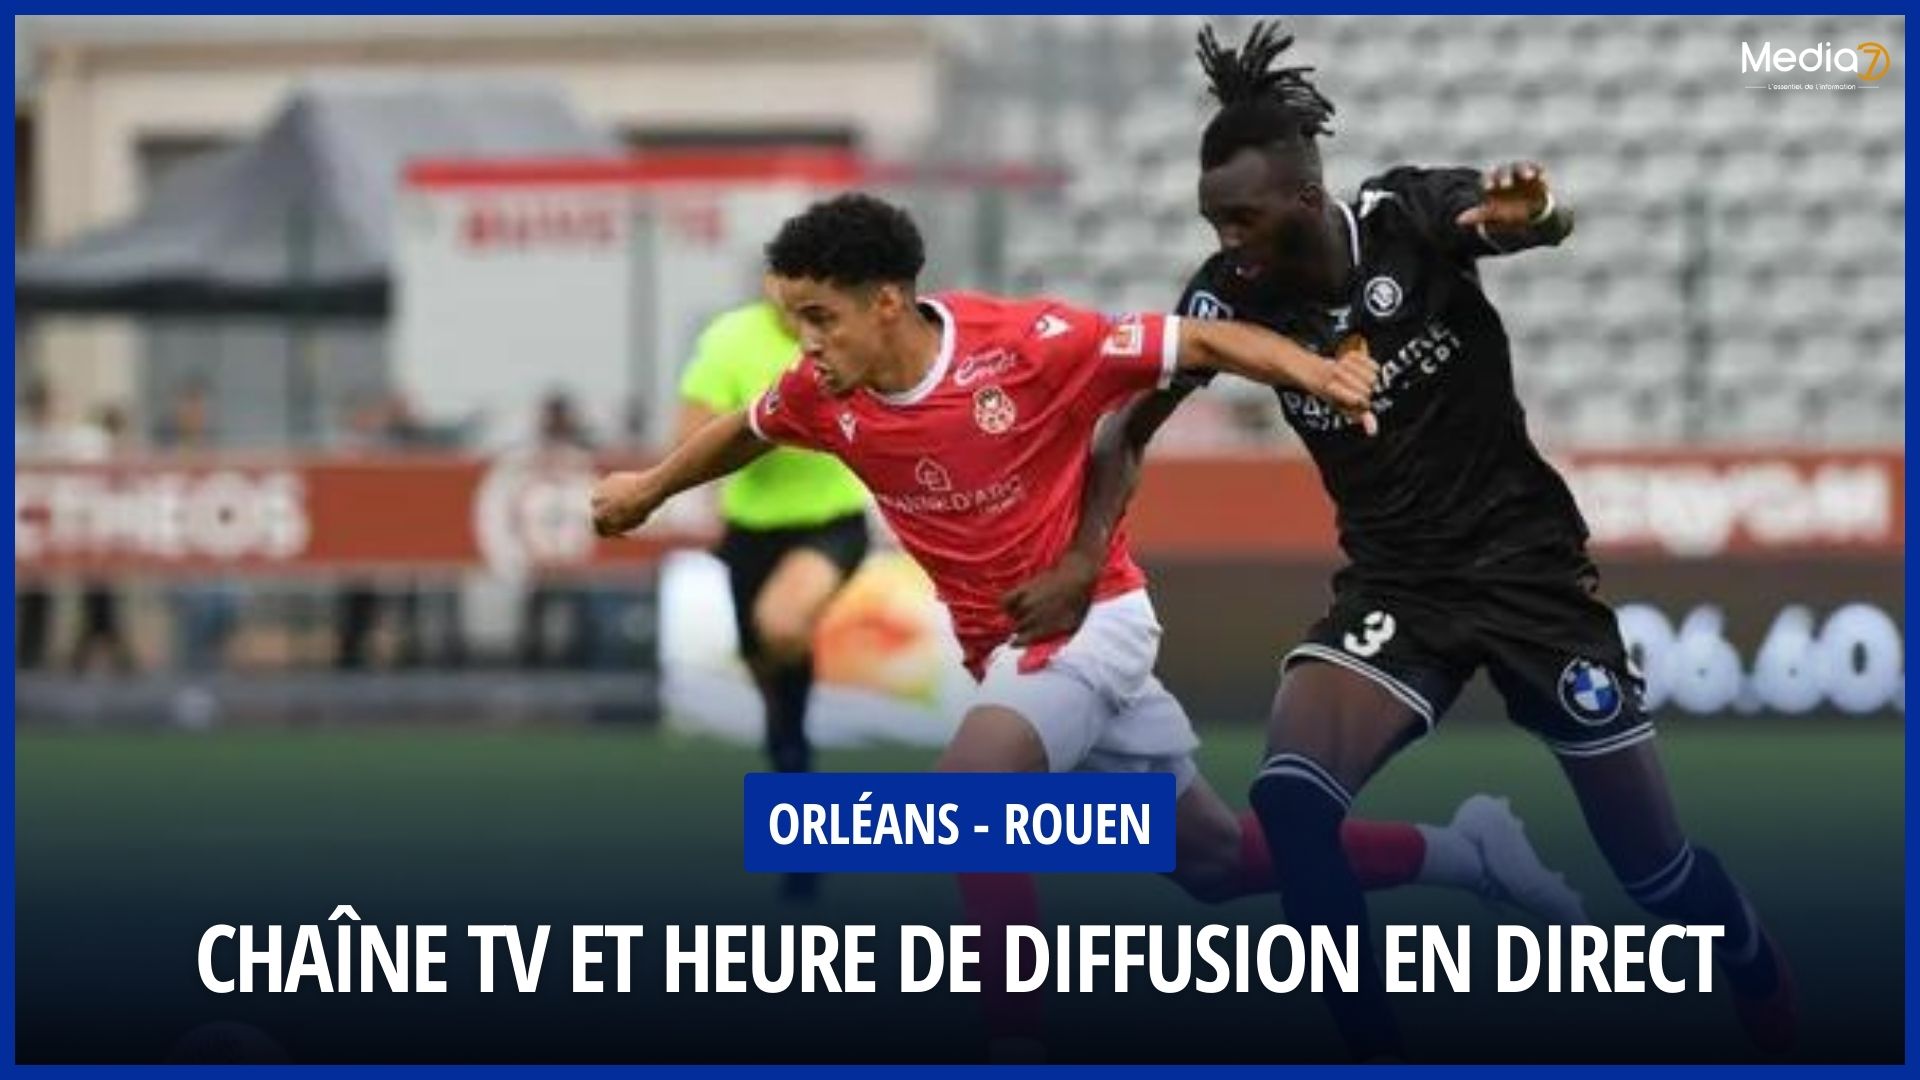 Match Orléans - Rouen Live: TV Channel and Broadcast Schedule - Media7